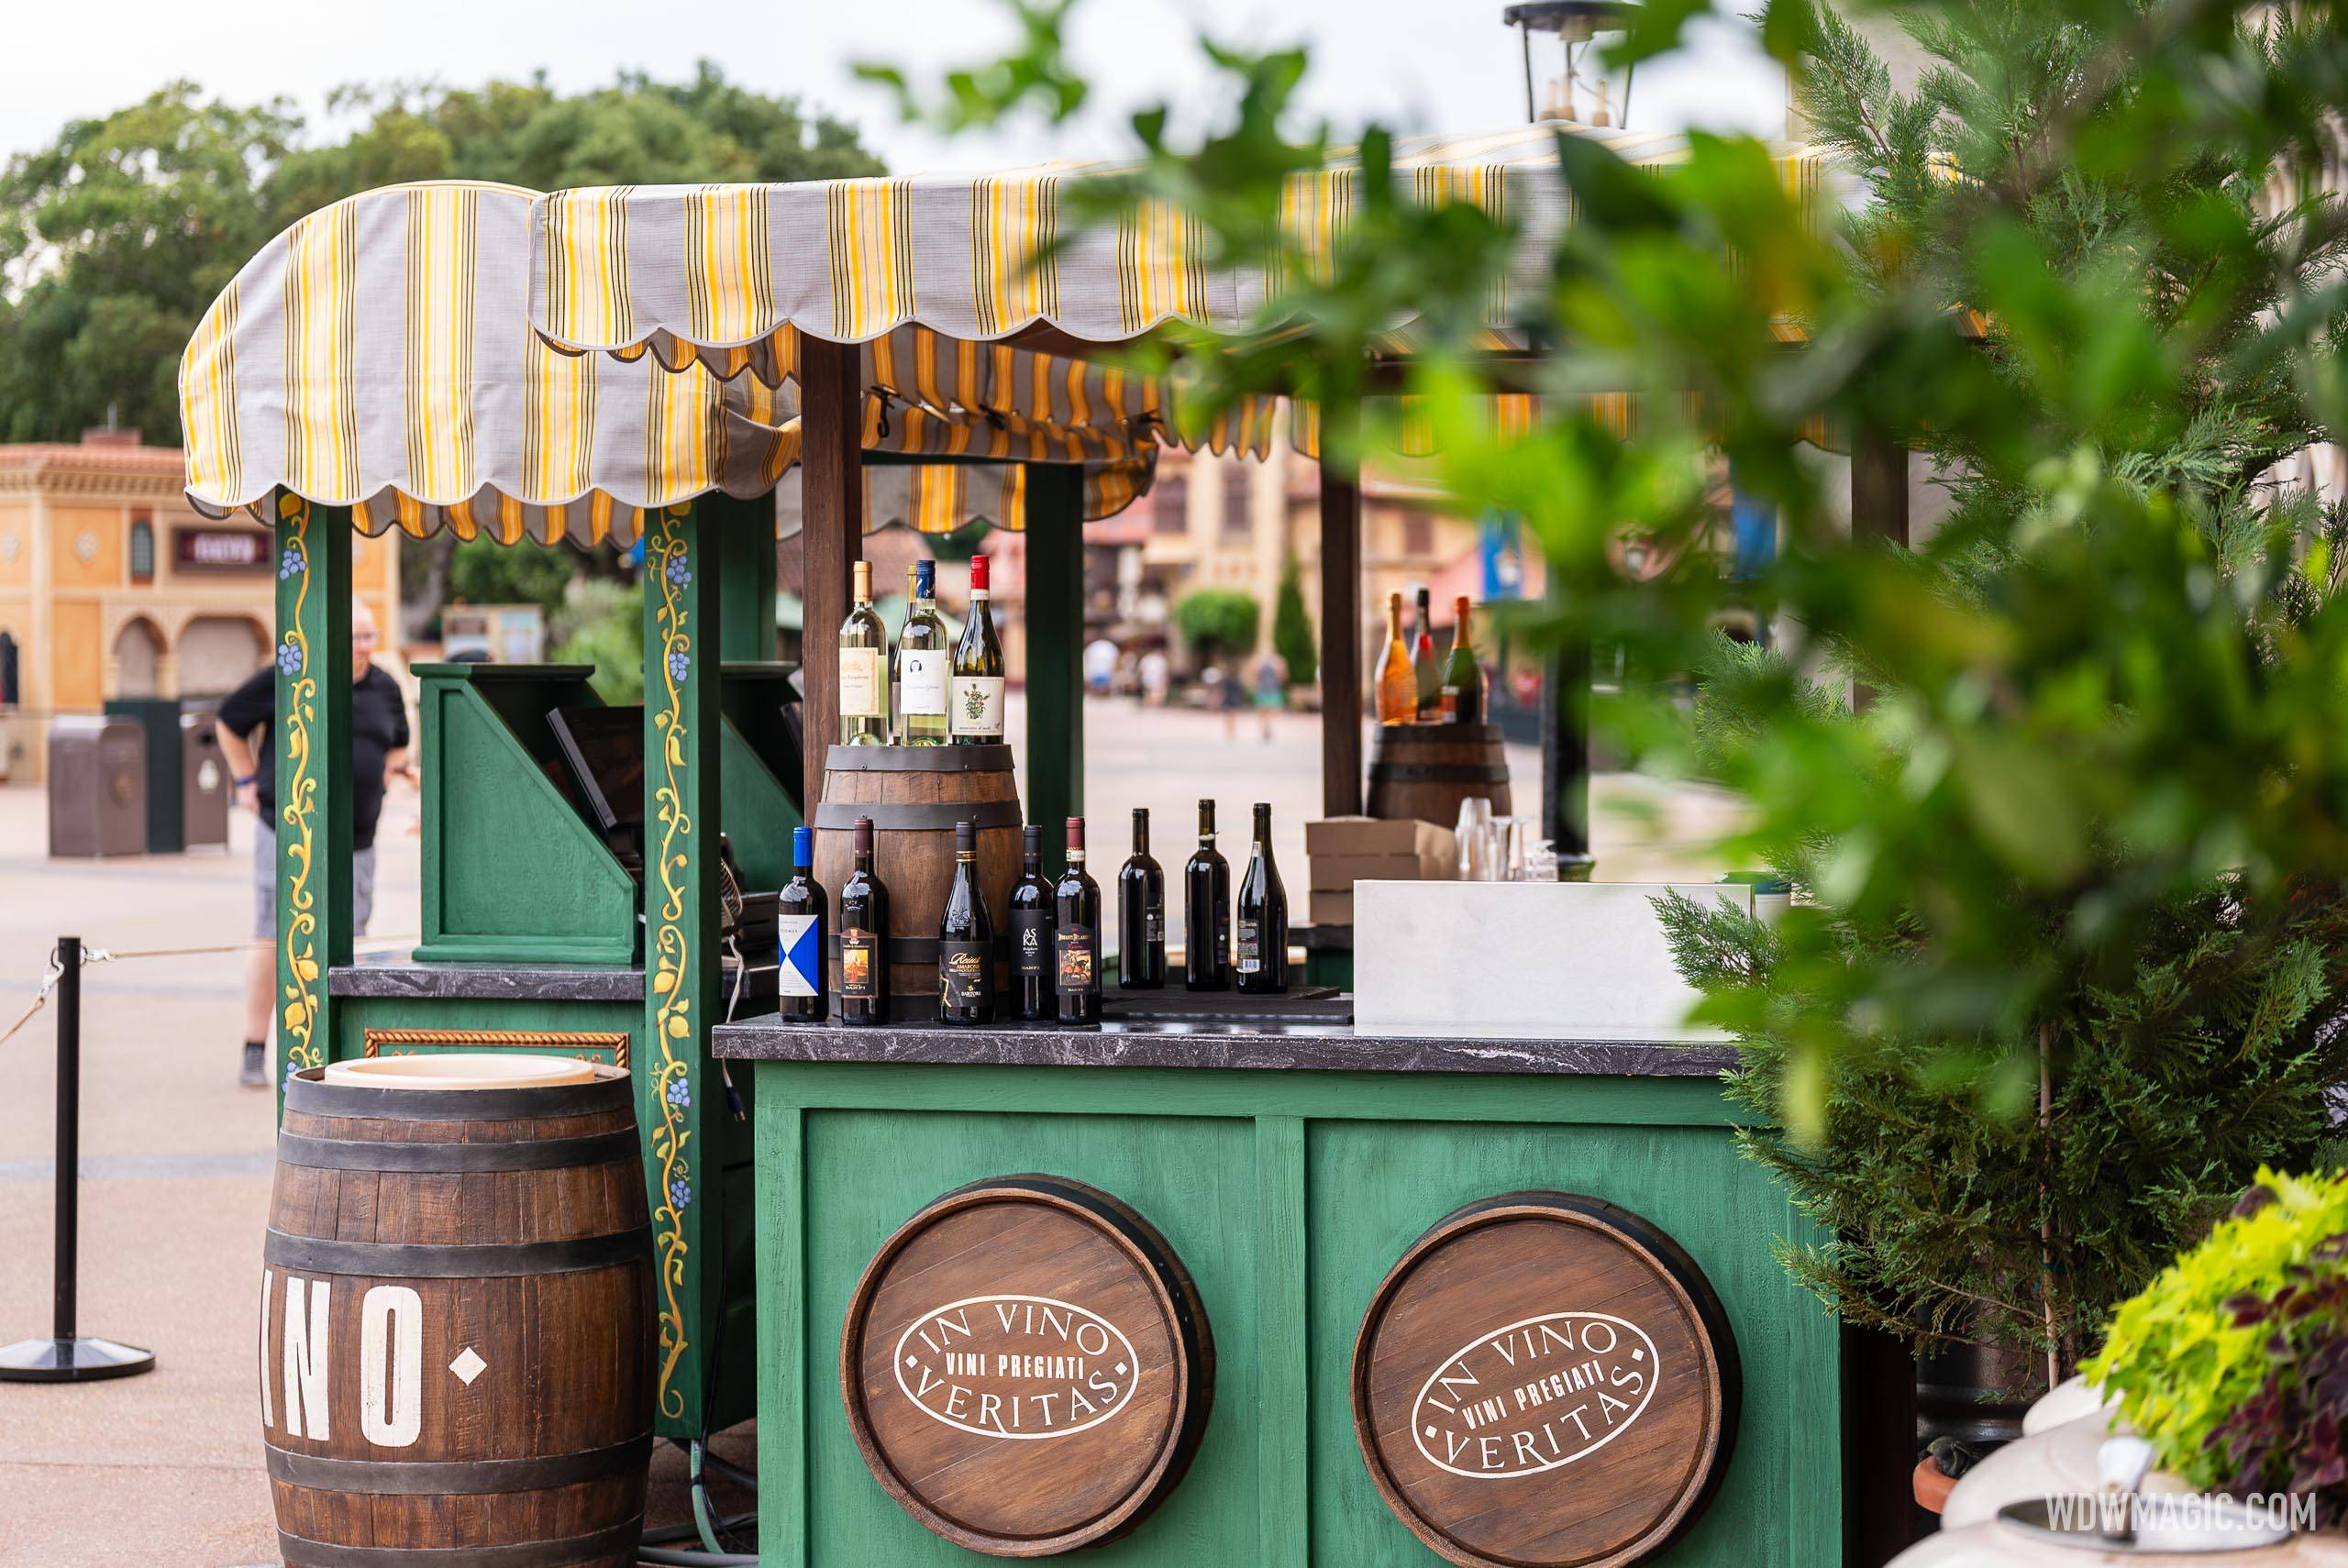 Italy Pavilion wine cart overview